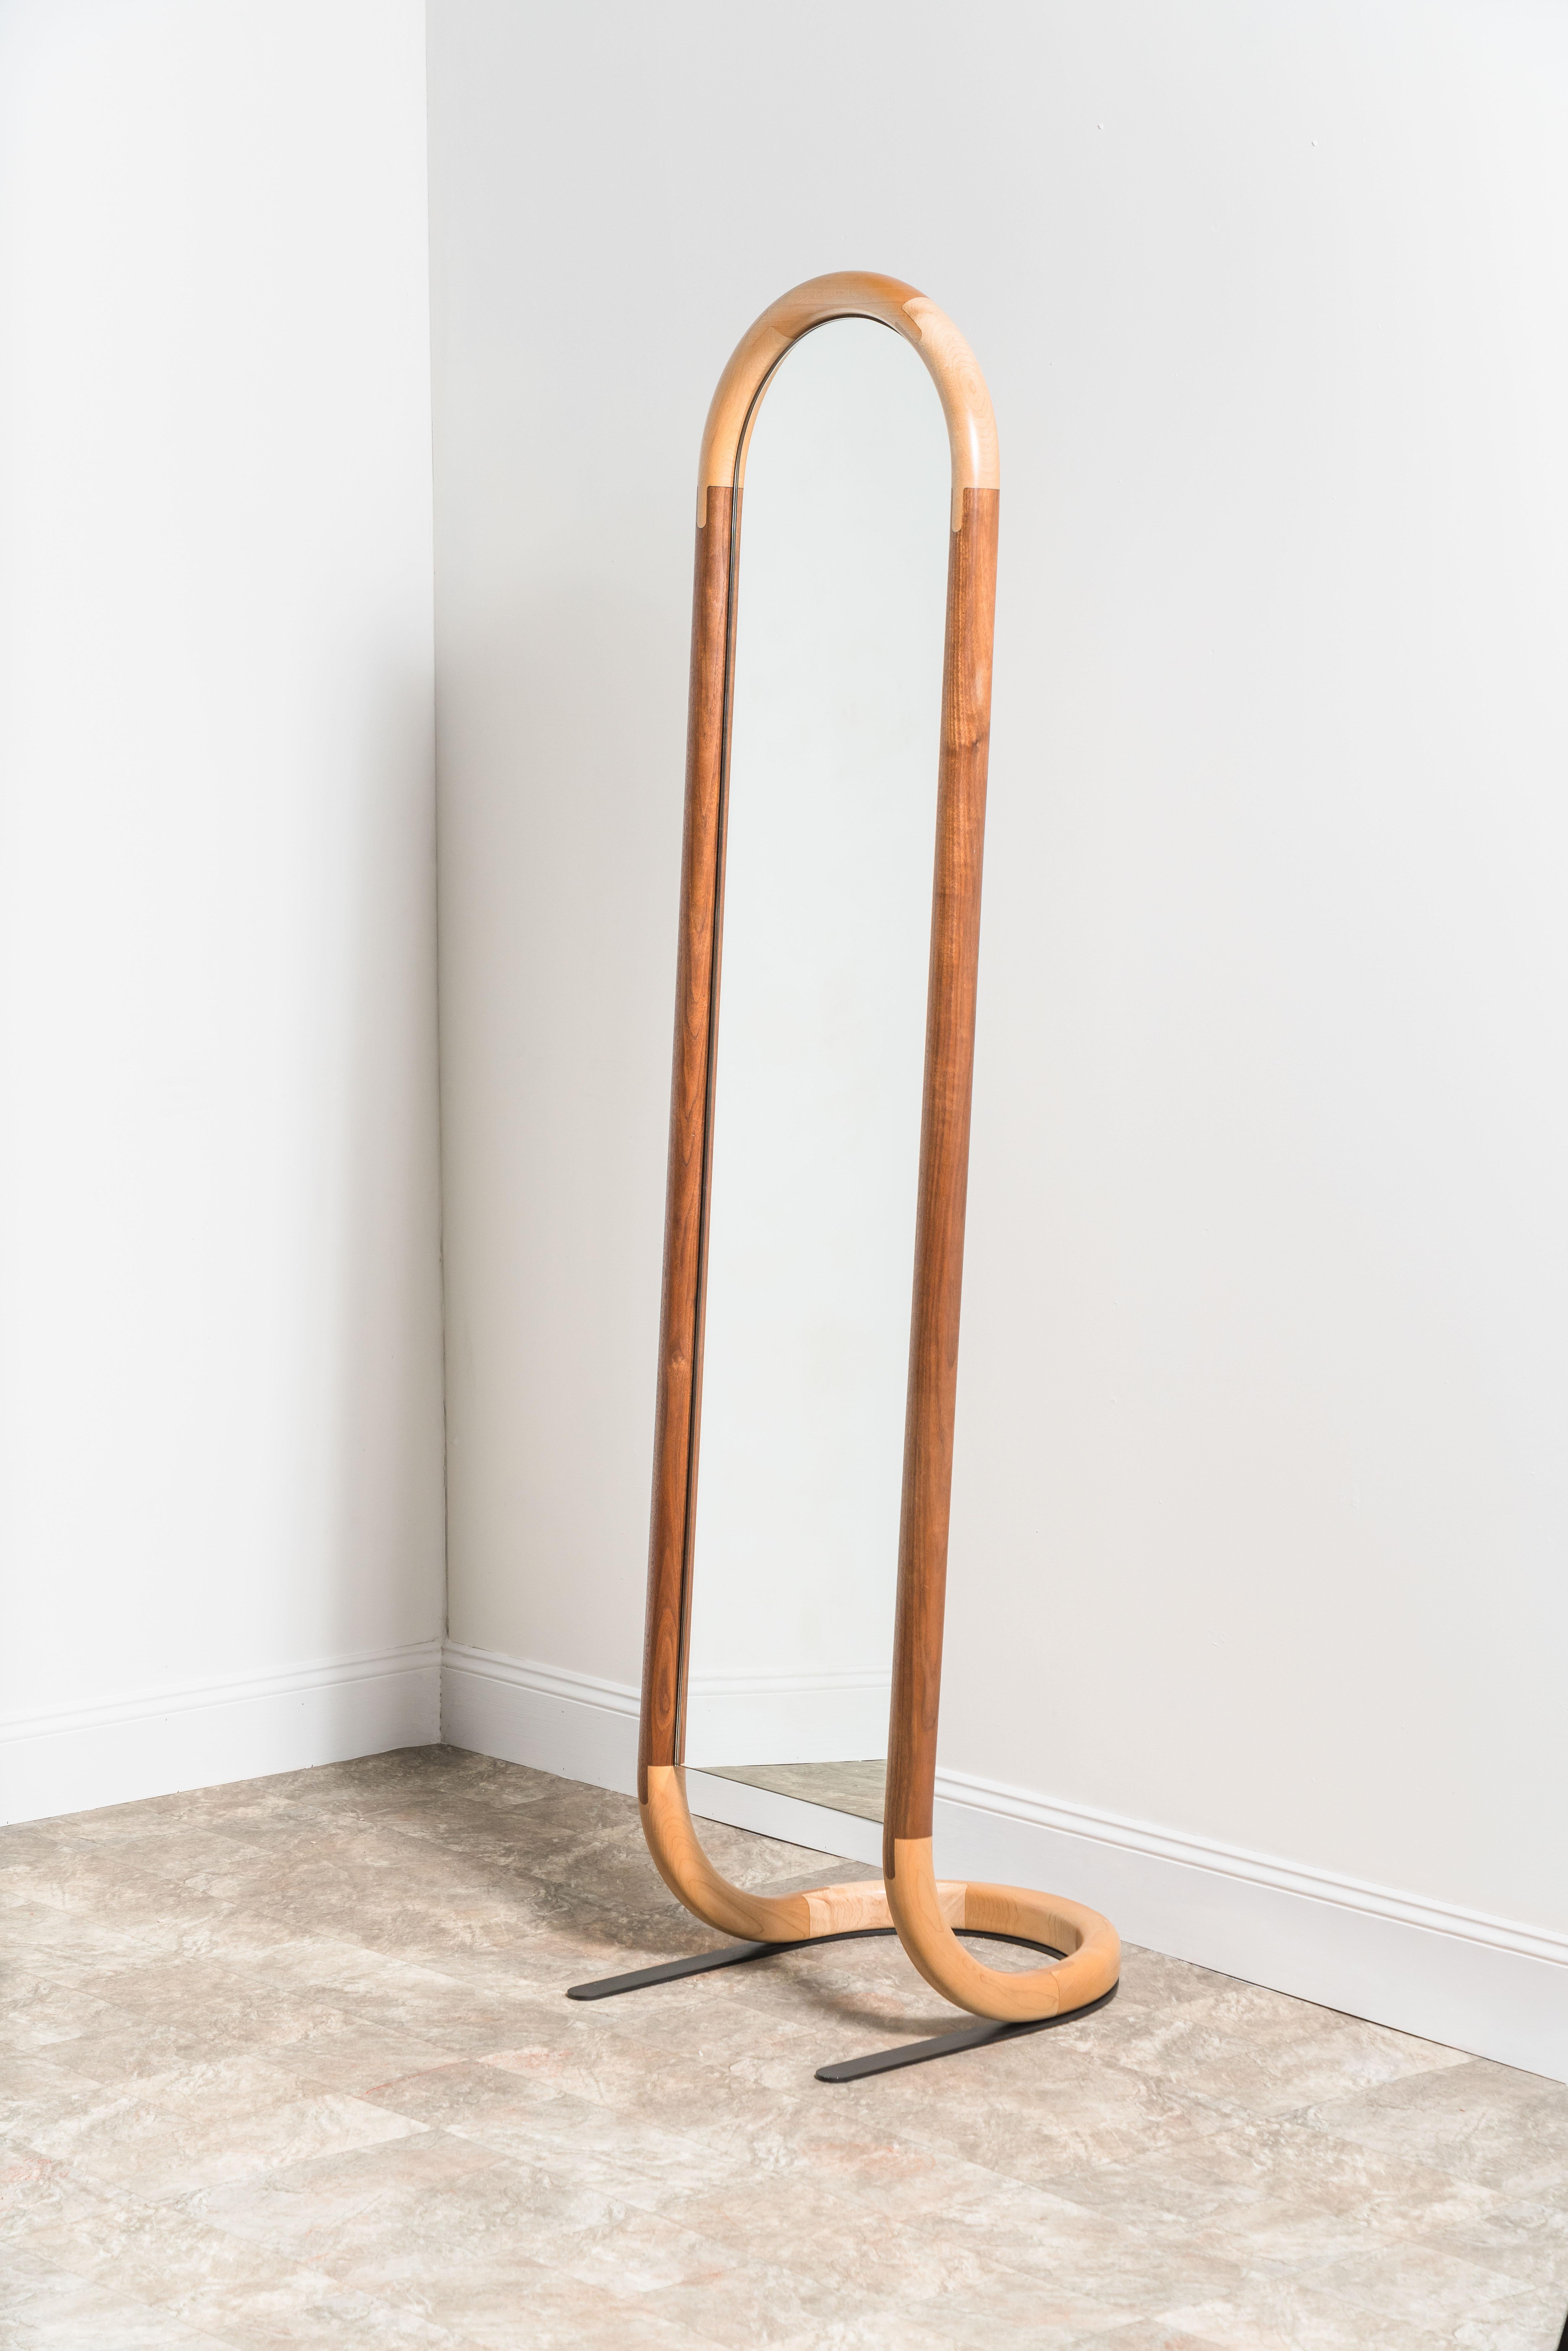 Featuring a distinctive and elegantly counterbalanced form and exquisite joinery, the Standing Halo mirror has stunning presence. Constructed to the very highest standards of craft, one at a time, by hand in our studio.

*This listing is for a